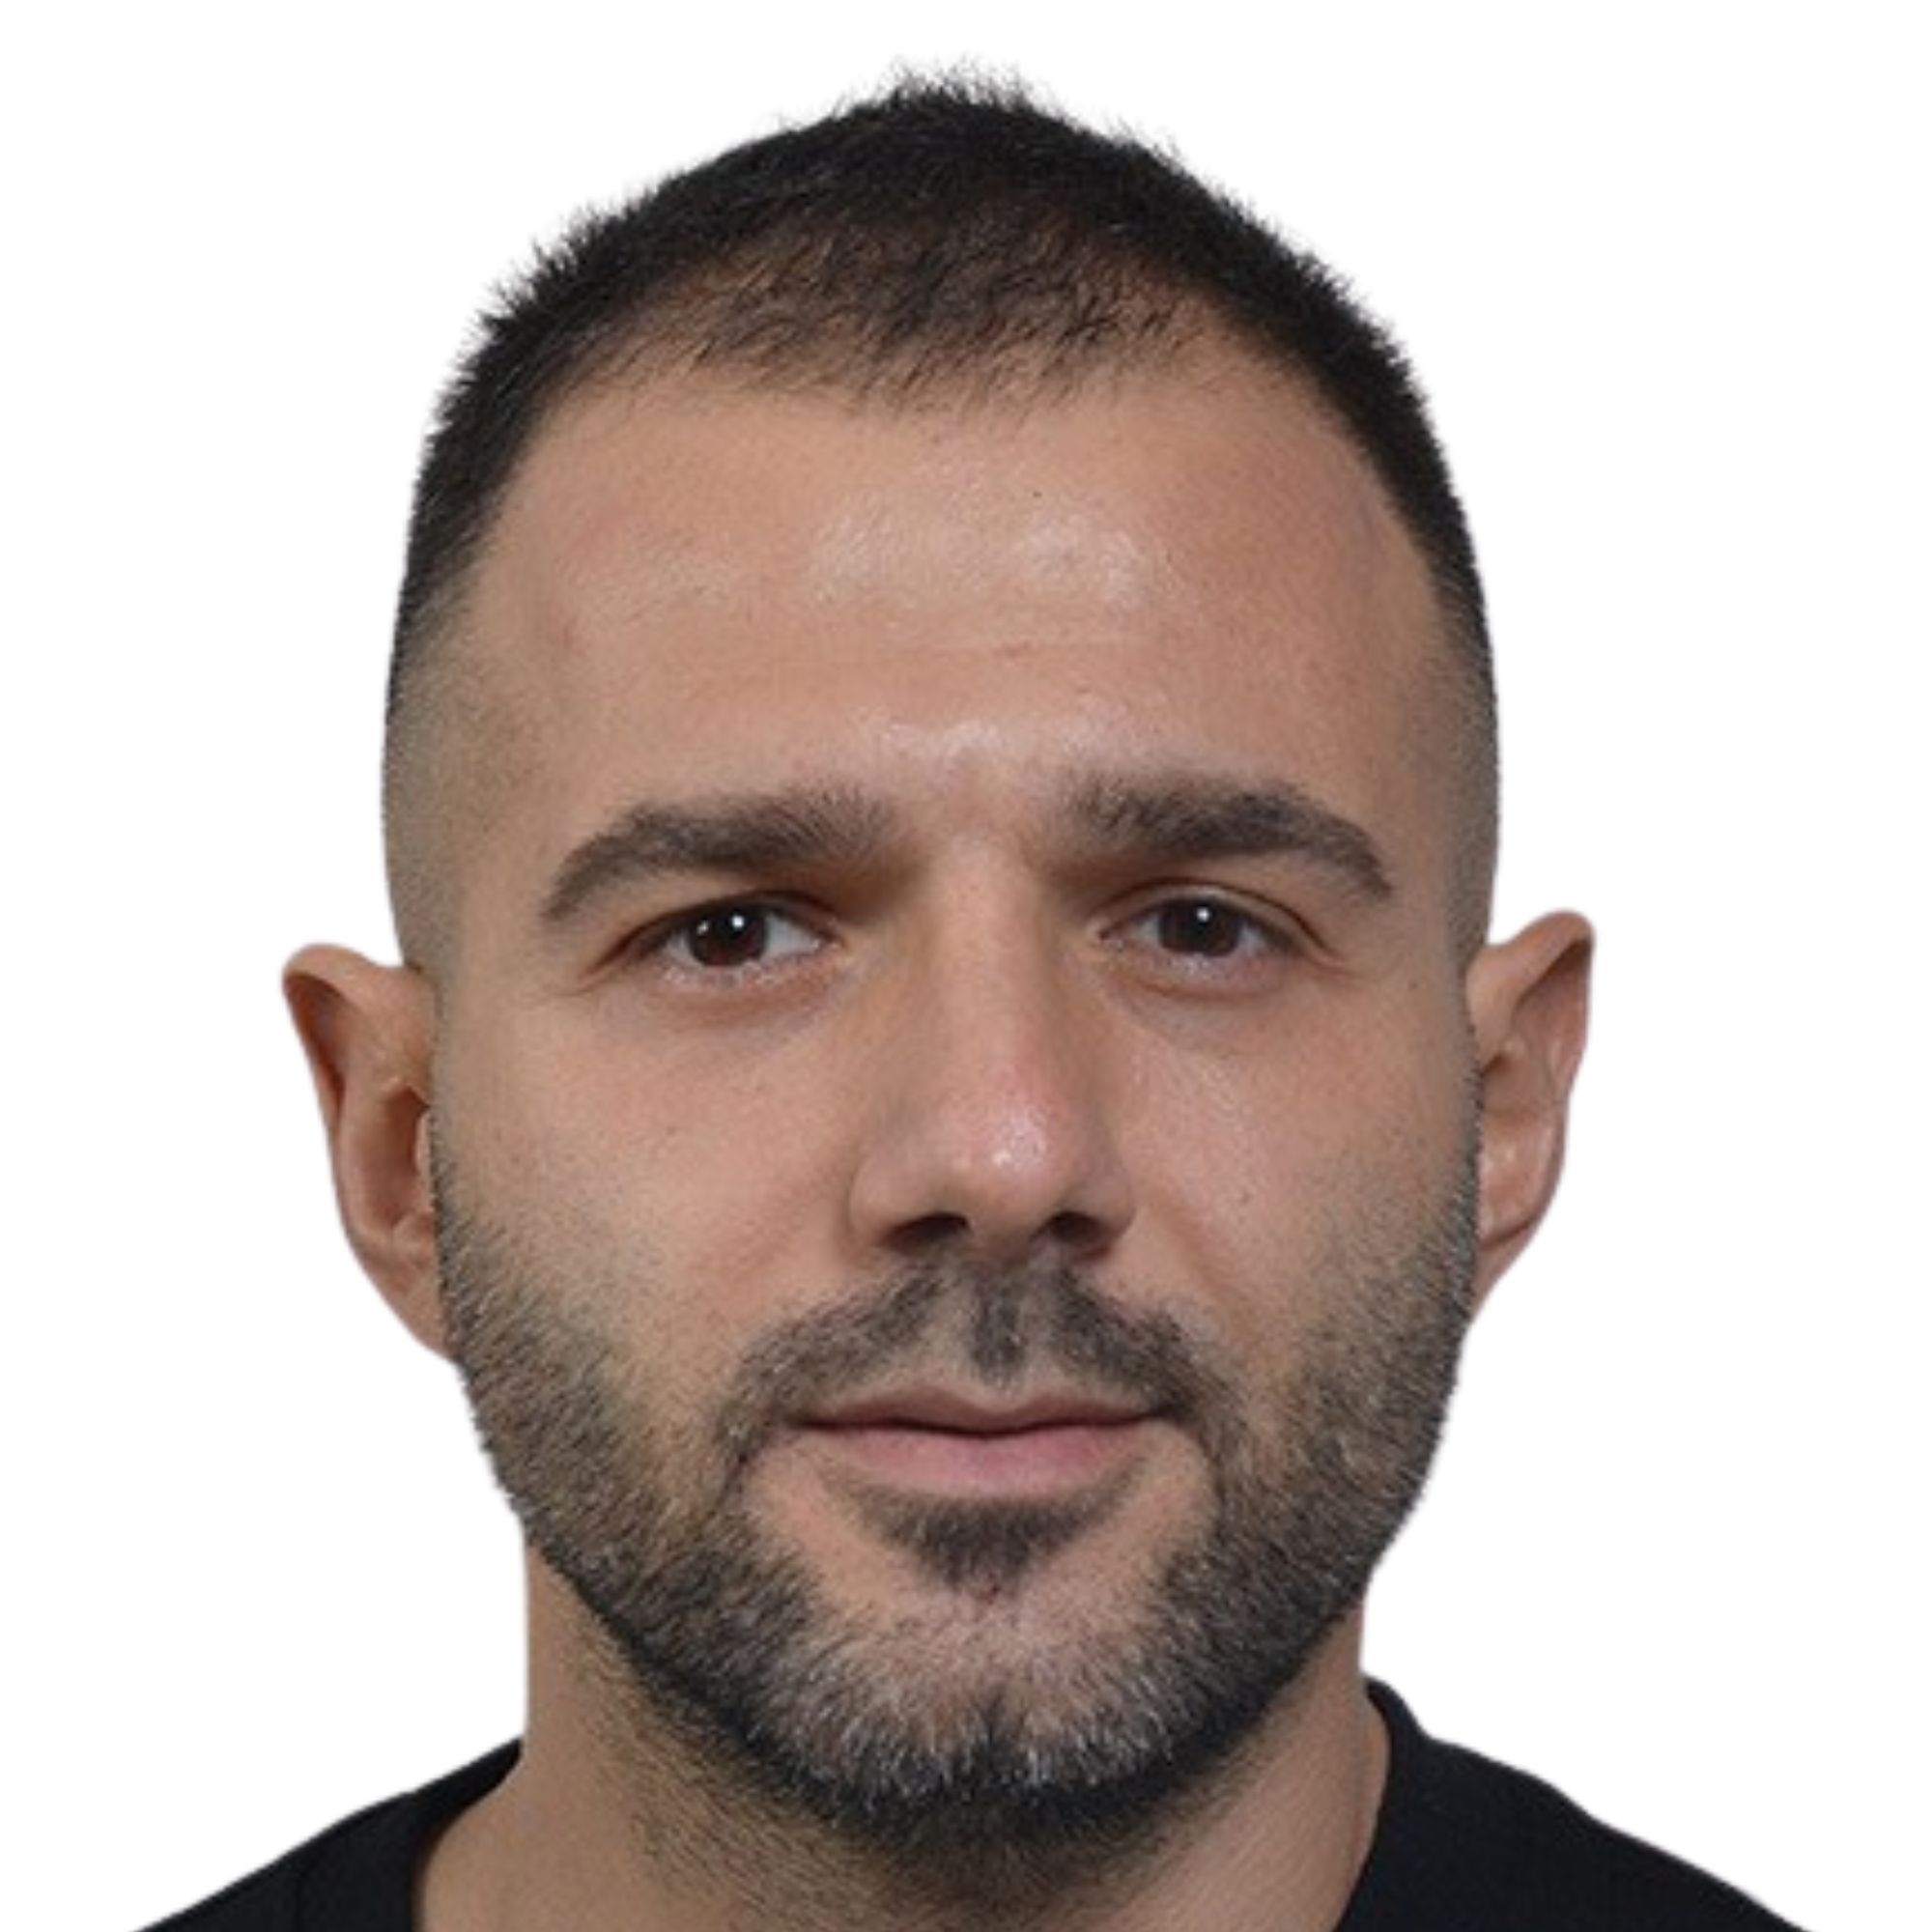 A picture of Seymen Usta, wearing a black t-shirt against a white background